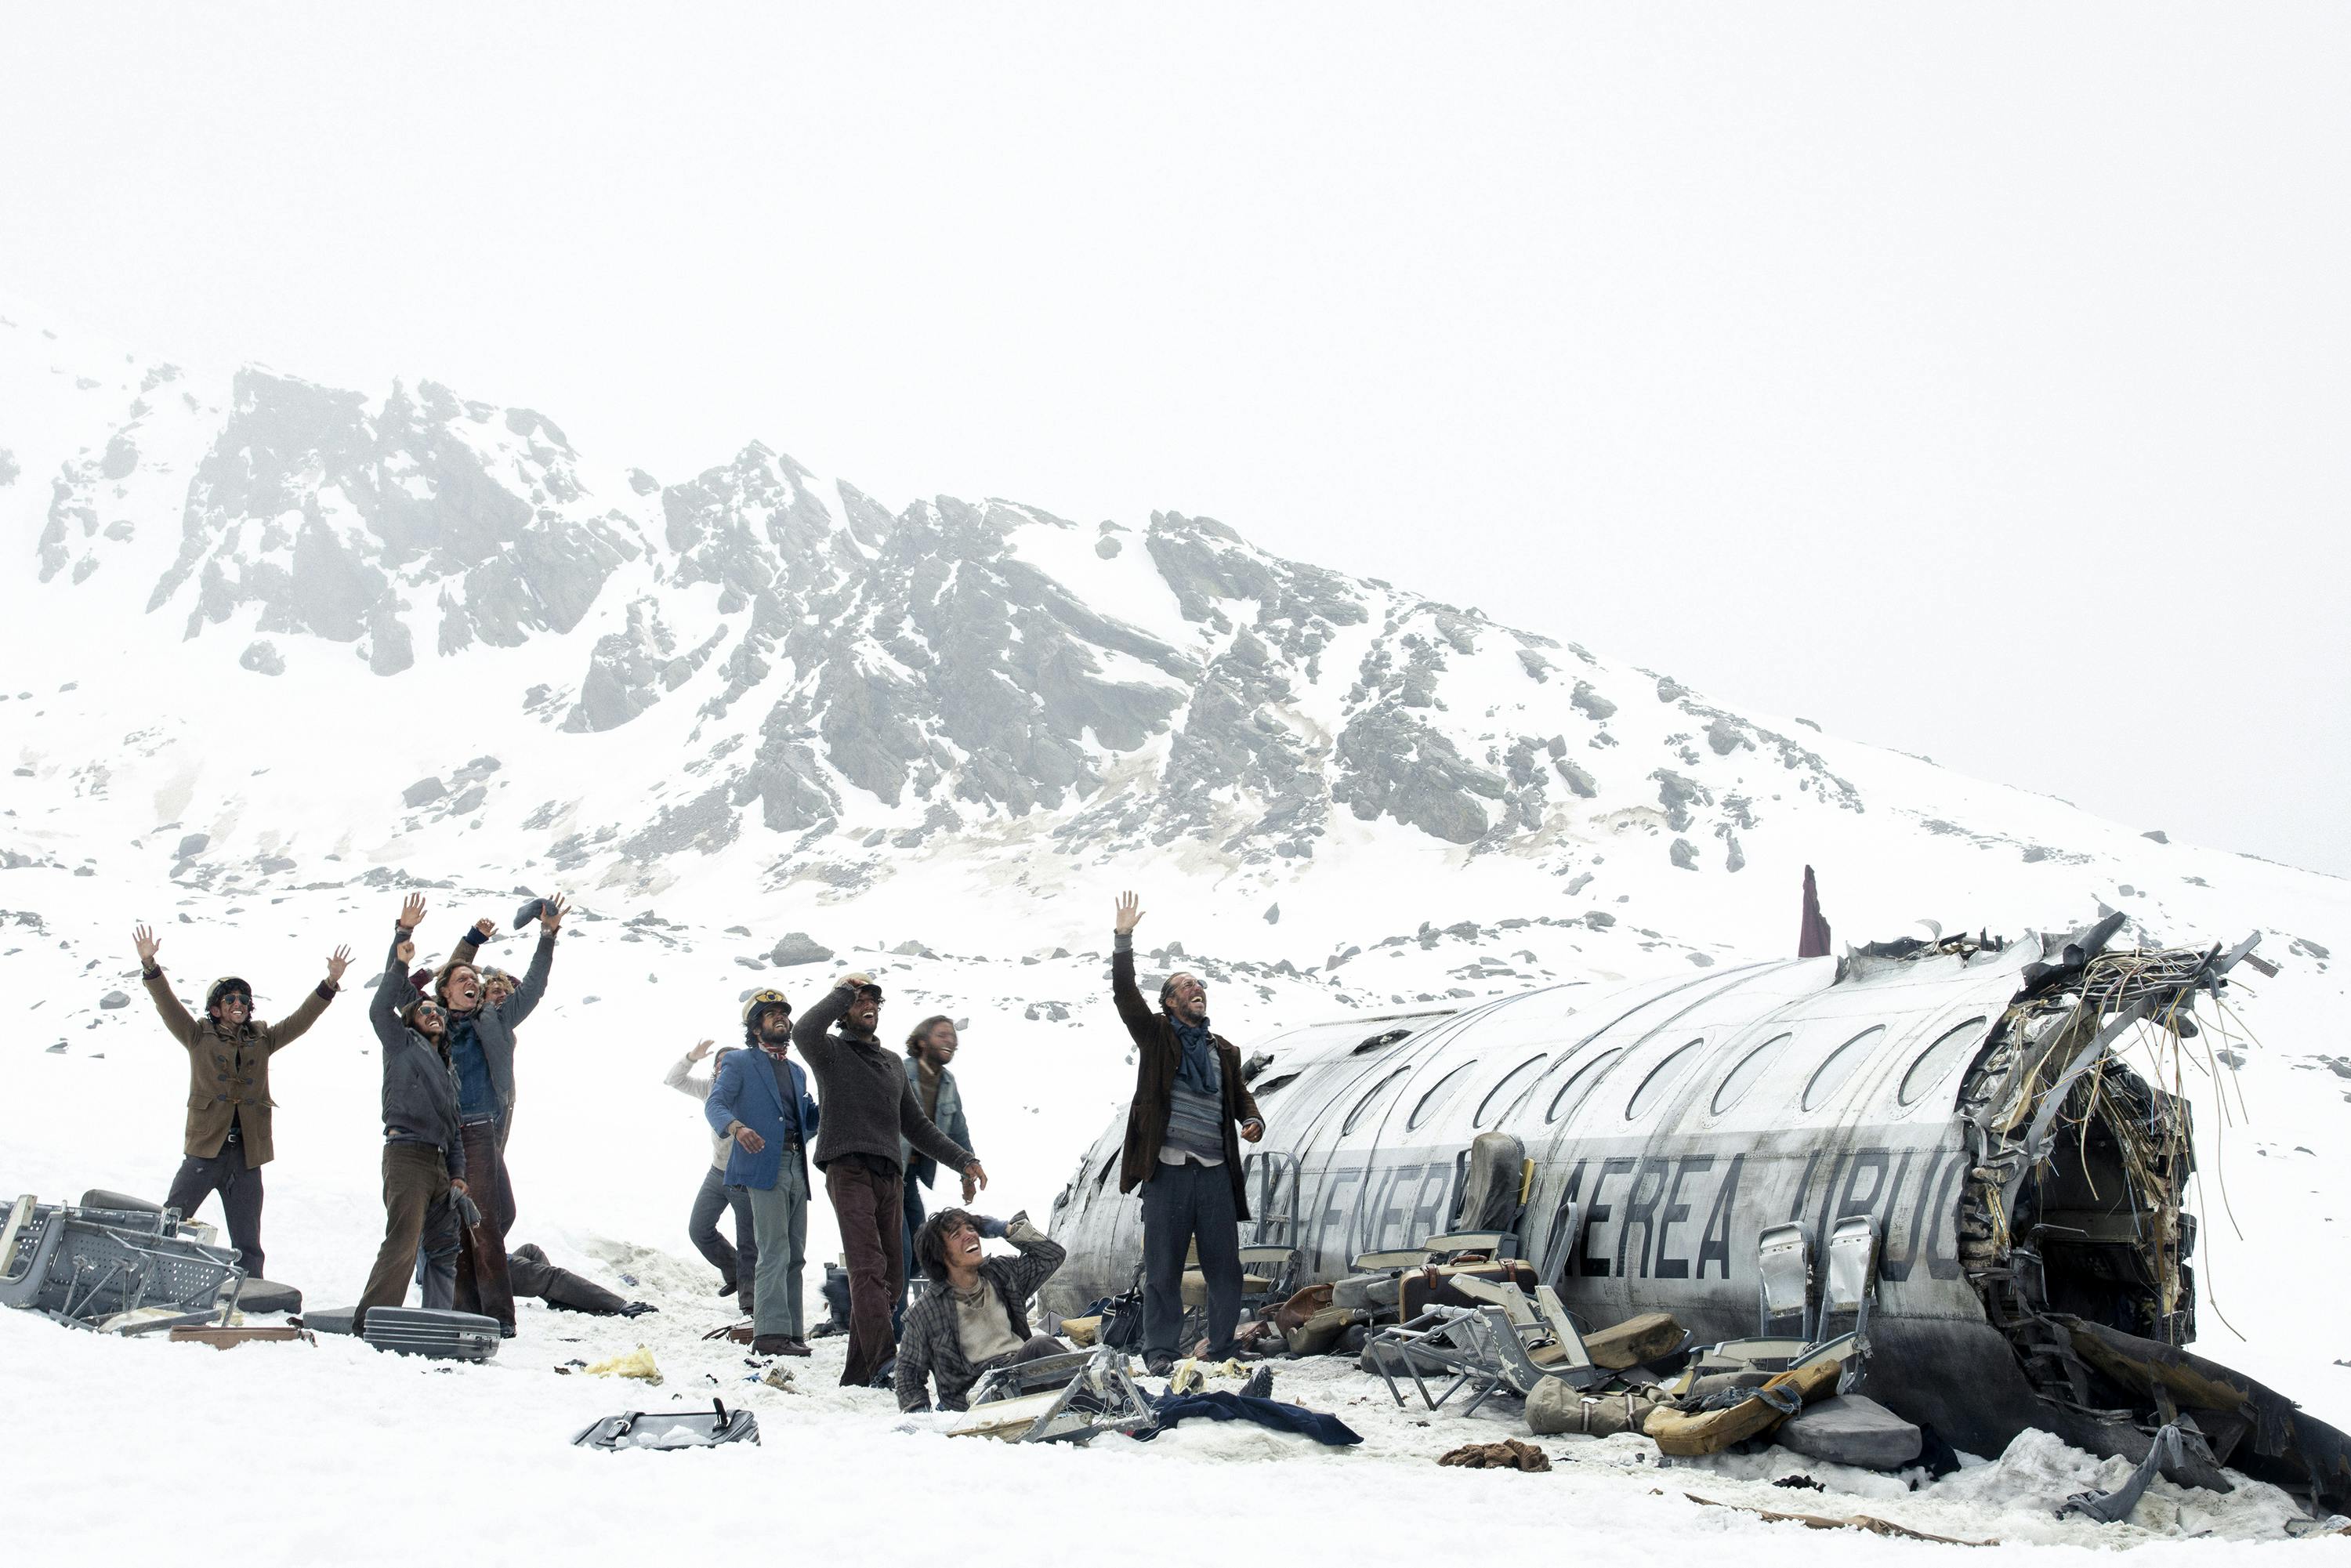 An image of people standing by a plane wreck in a snowy expanse.